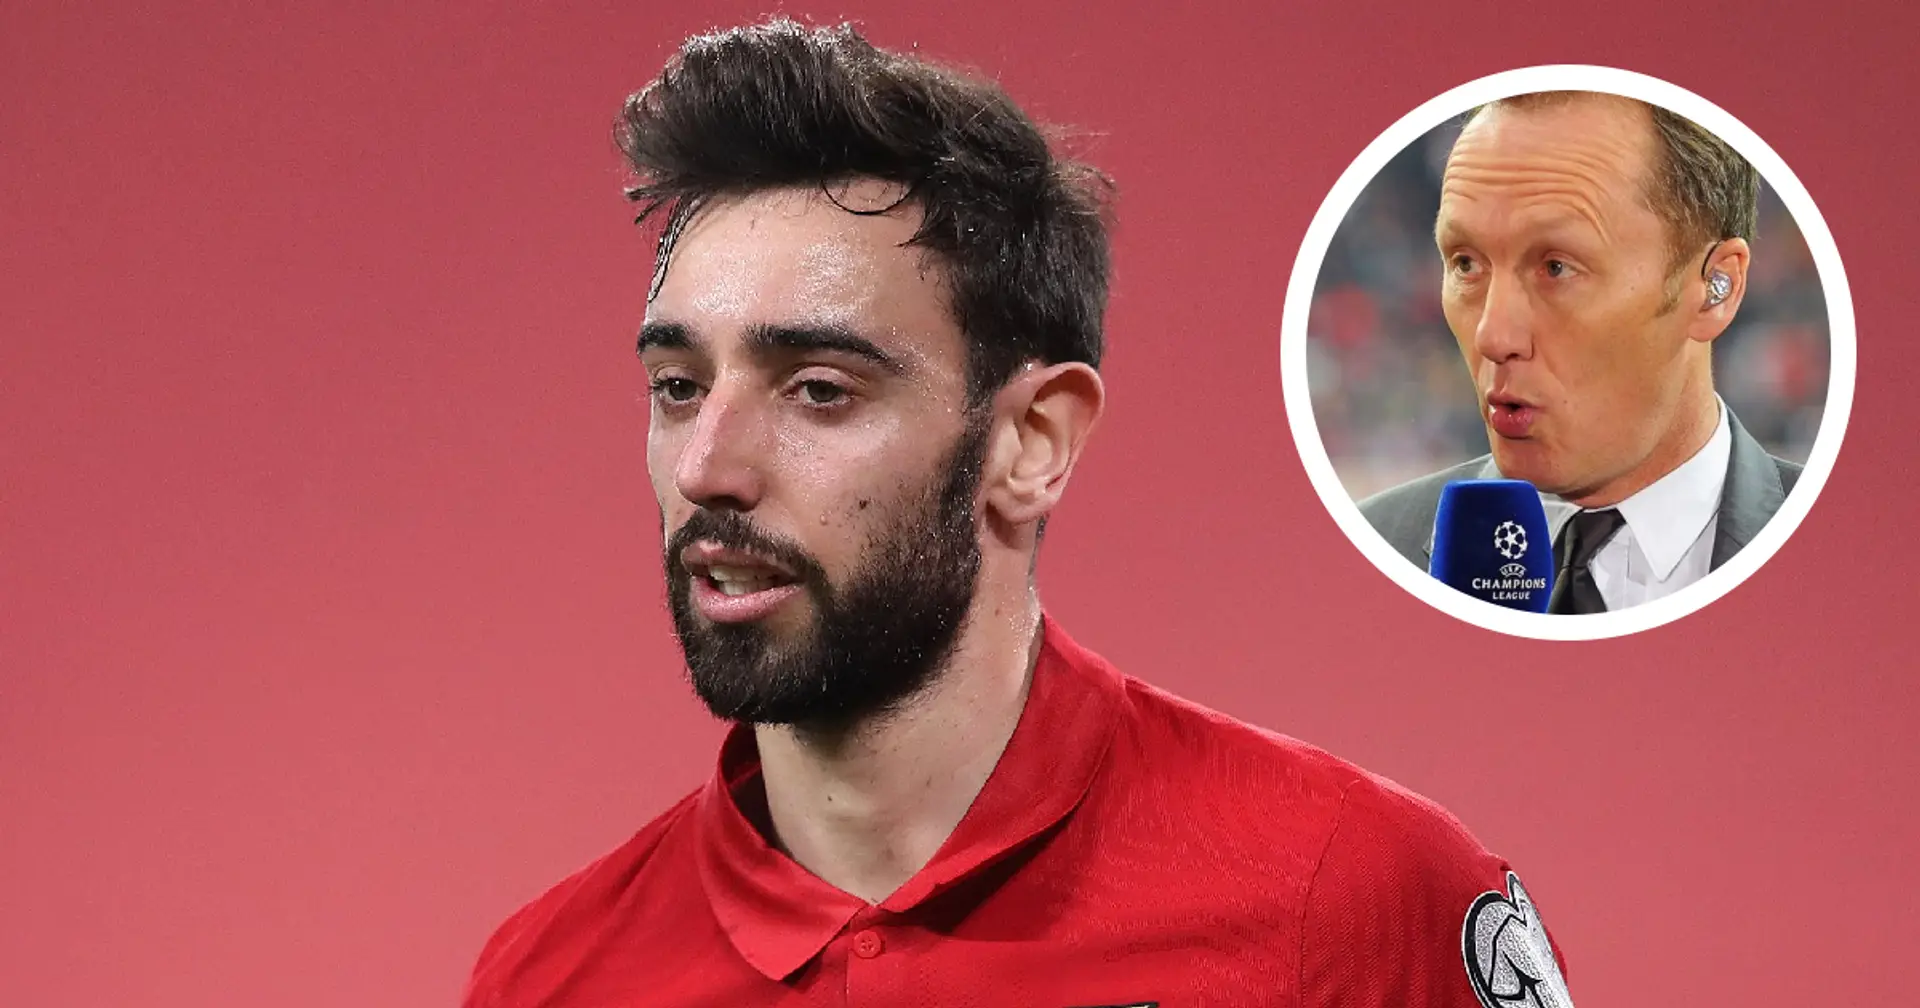 Bruno Fernandes criticised for 'strolling' on the pitch as Portugal lose to Germany  